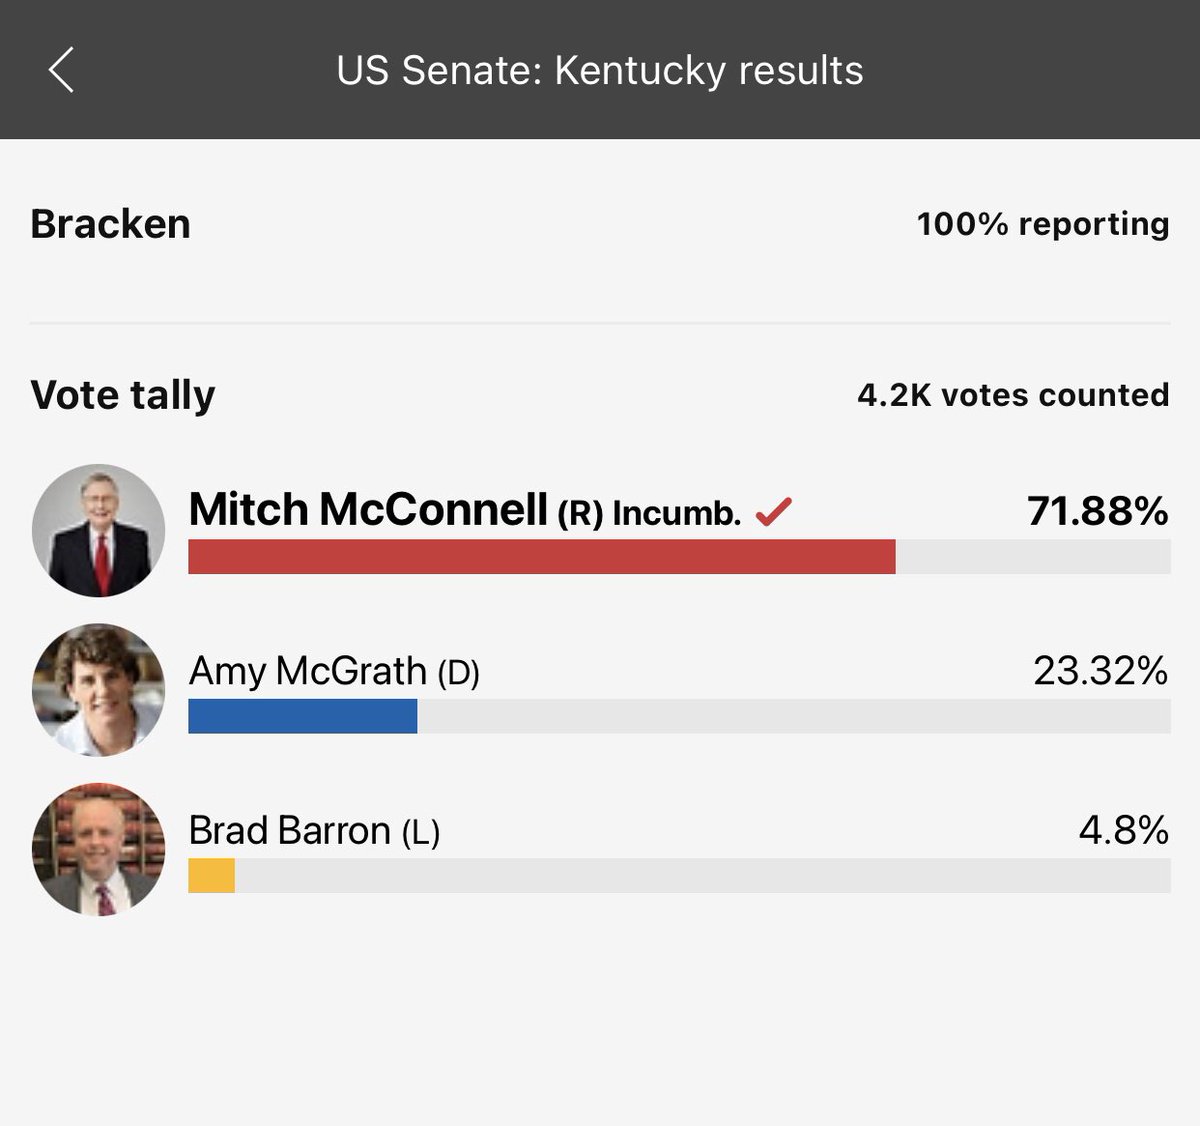 BRACKEN - Mitch won 71.88% of 4,200 votes - roughly 3,019 votes. There are 2,194 Registered Republicans, 4,221 Democrats, & 370 others